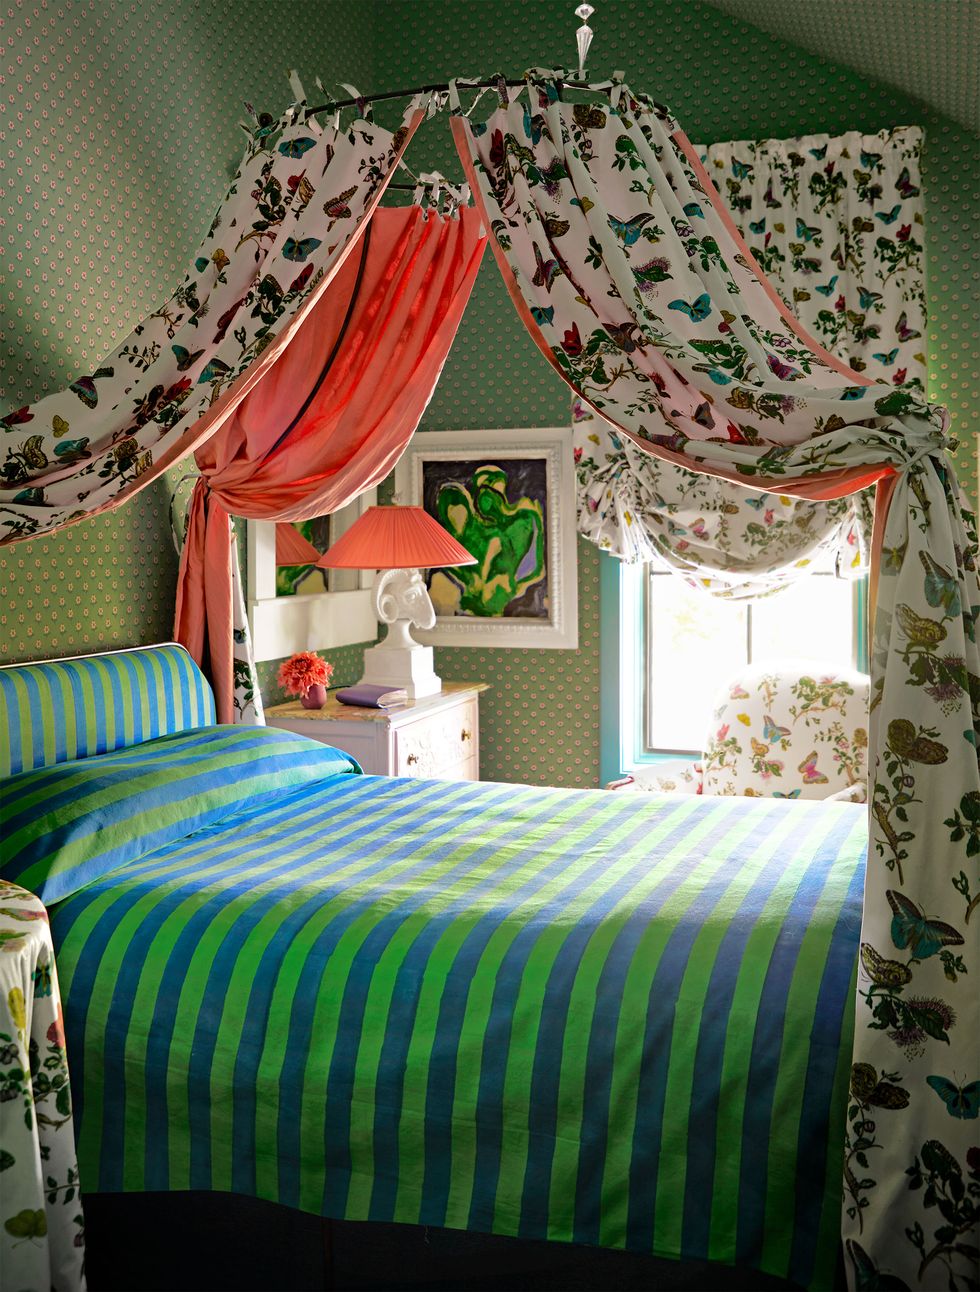 bed with circular canopy in a chintz fabric with butterflies, an armchair and round table in matching fabric, blue and green striped bedcover, nightstand with lamp, green wallpaper with subtle print